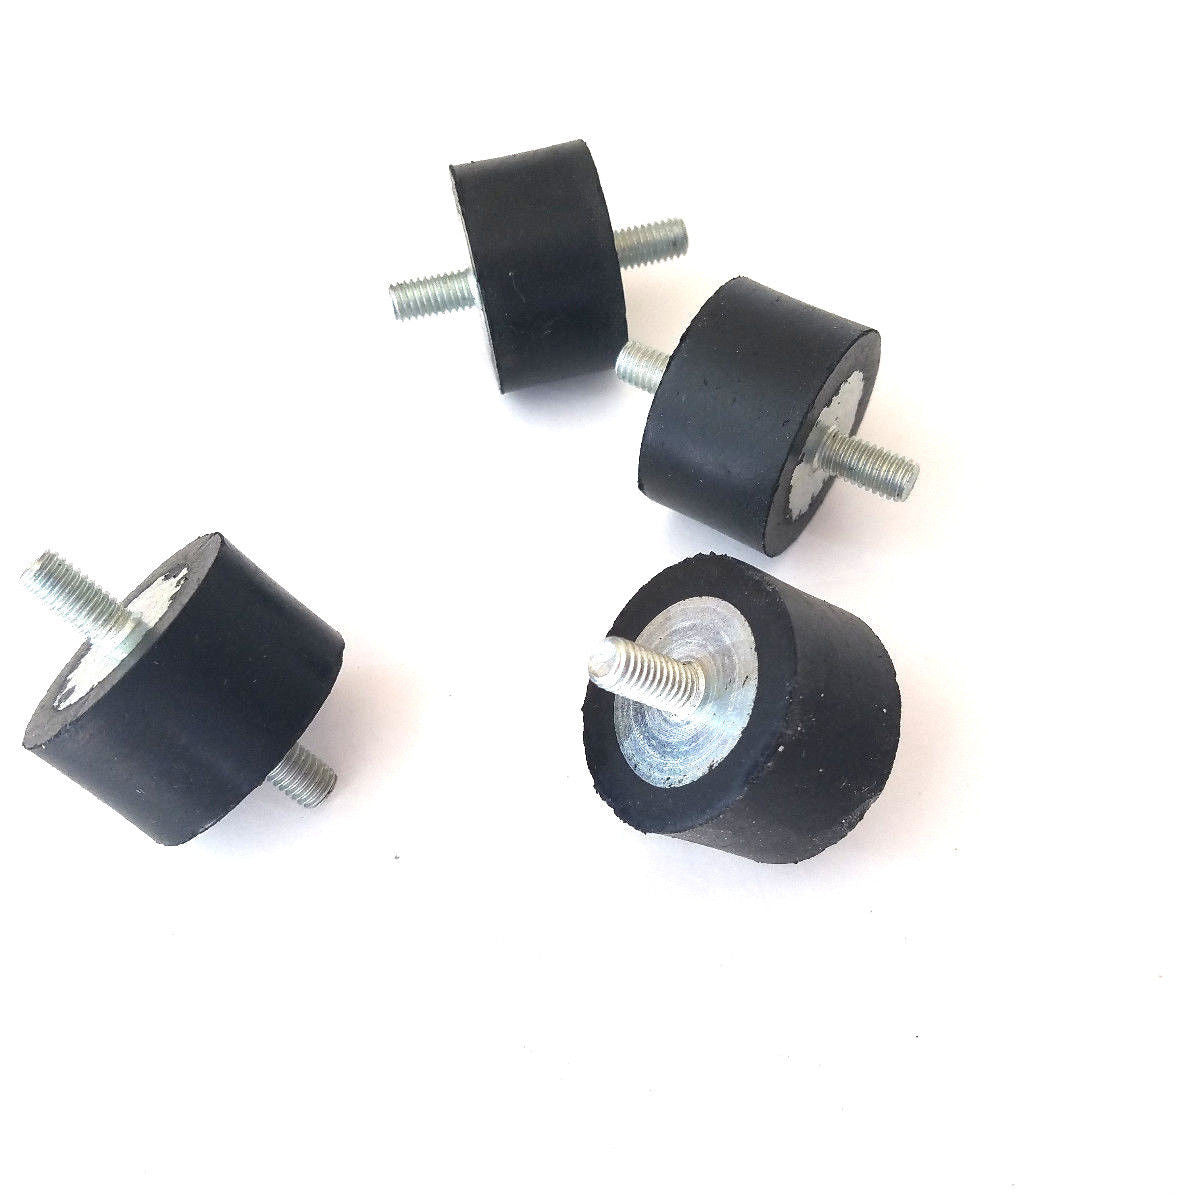 Buy Anti-Vibration Rubber Isolator s with Studs Shock Absorber, M8